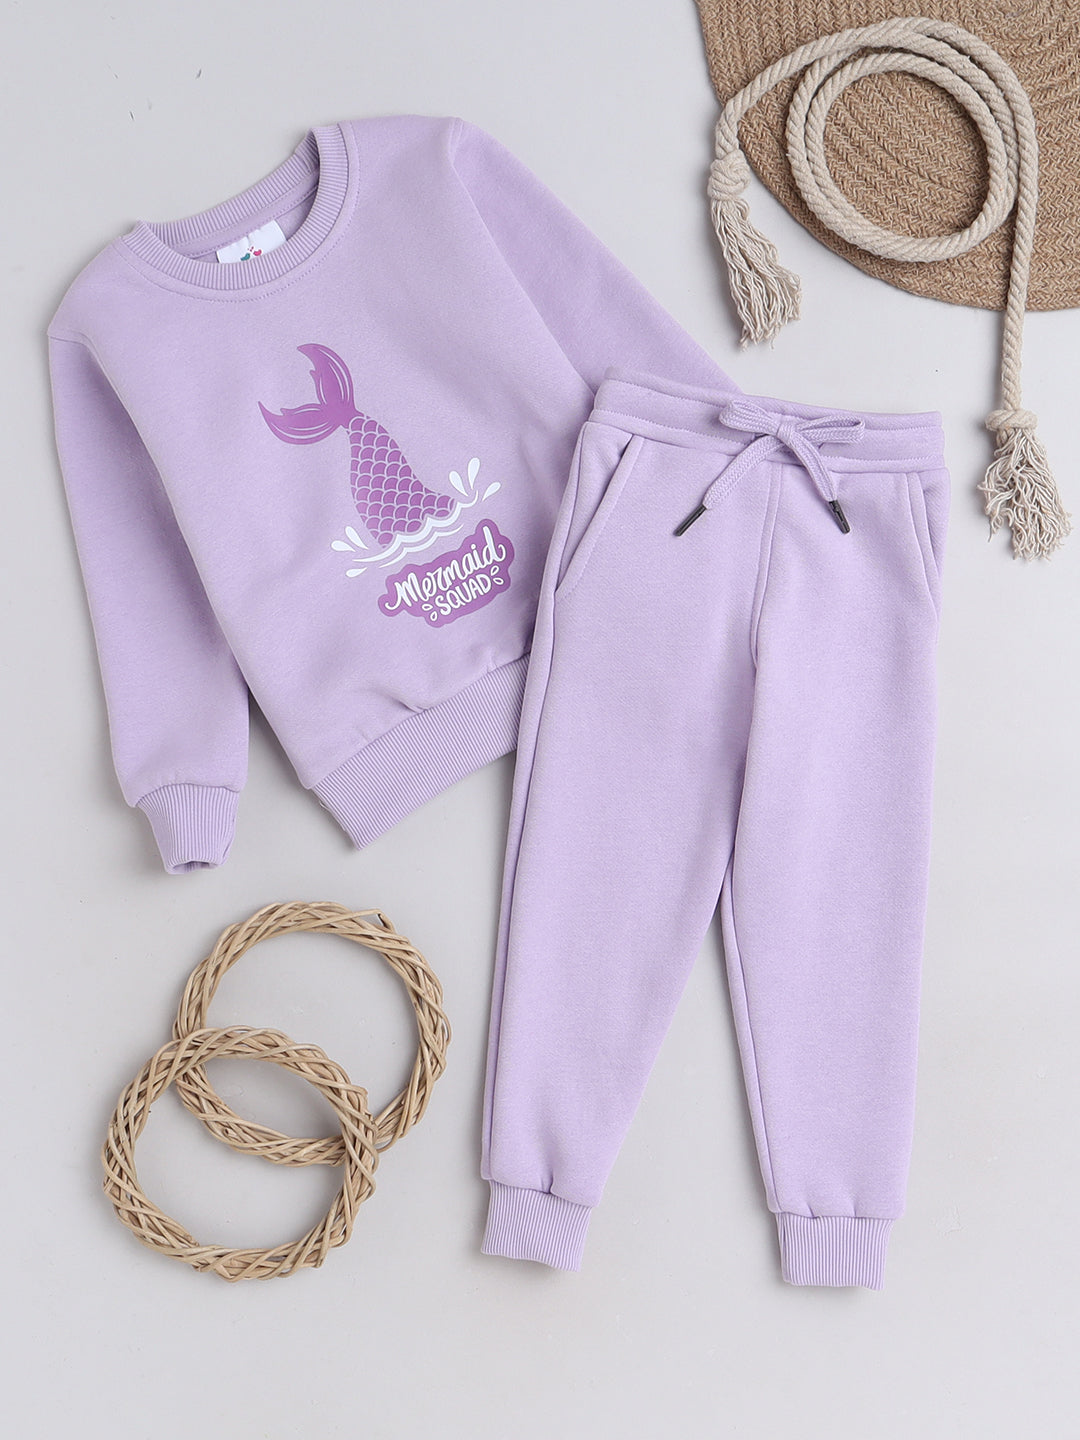 Knitting Doodles Kids' Jogger Set with Warm Fleece and Pretty Mermaid Squad Print- Purple